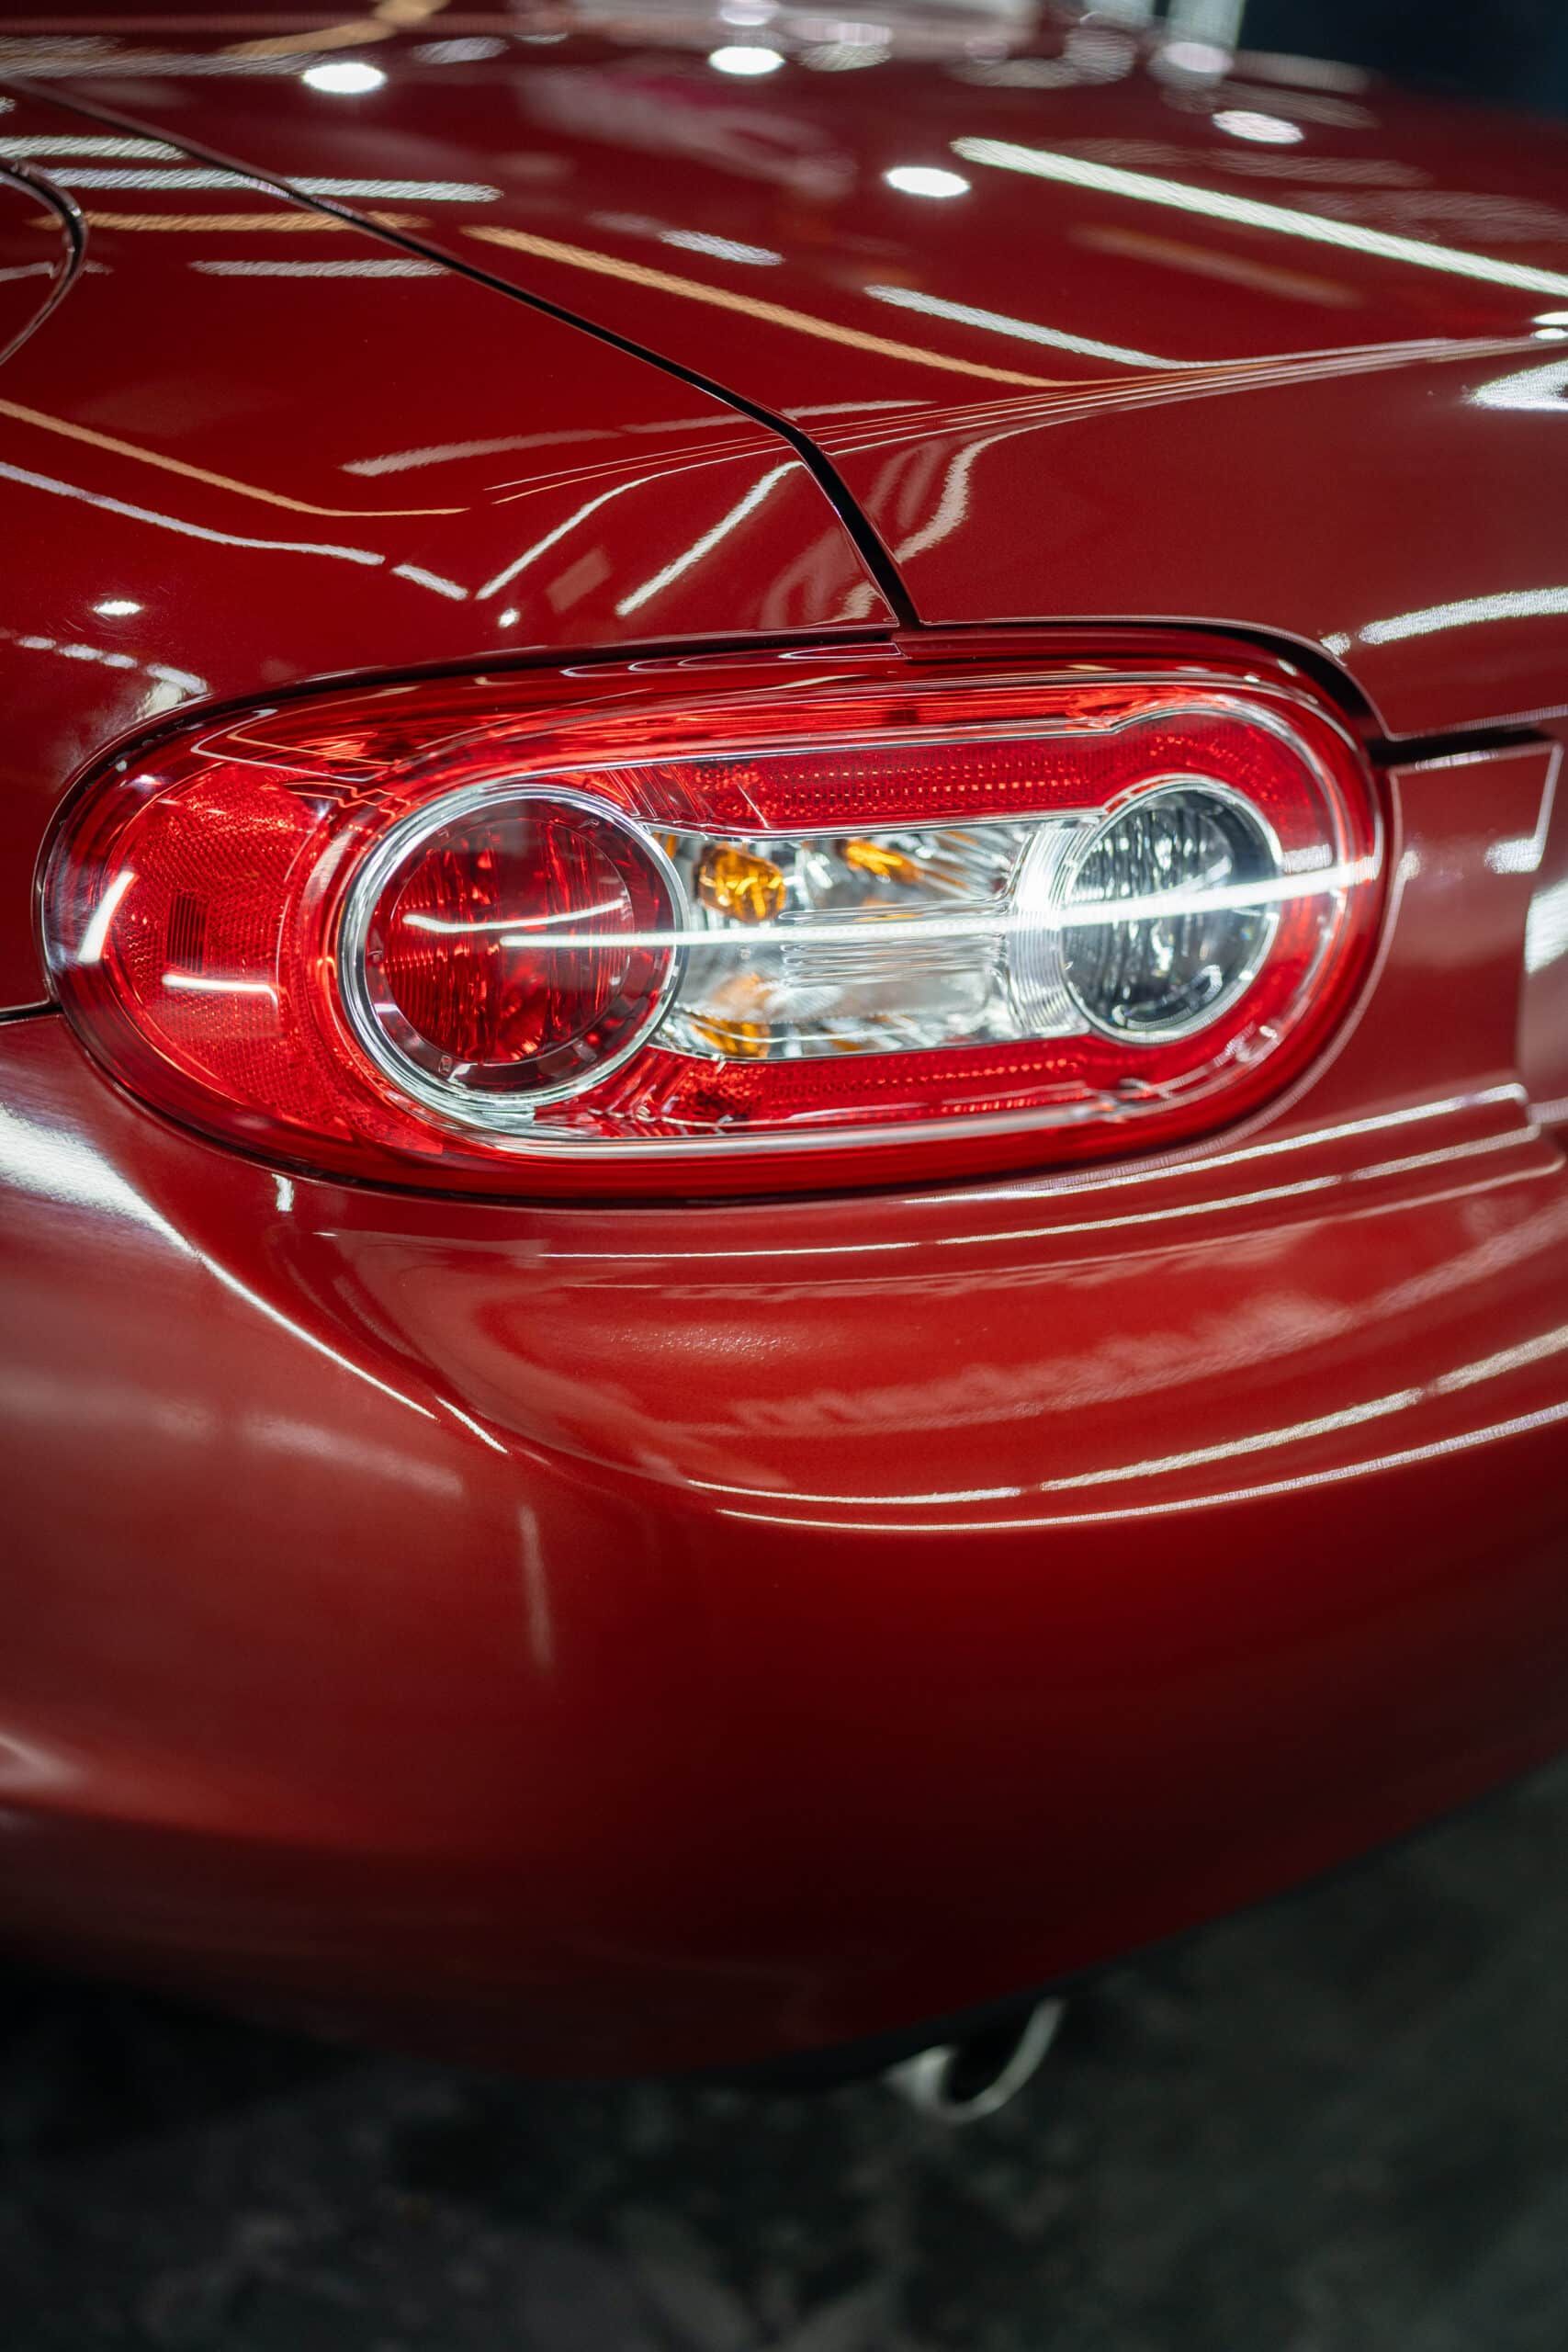 A close up of a red car 's tail light.